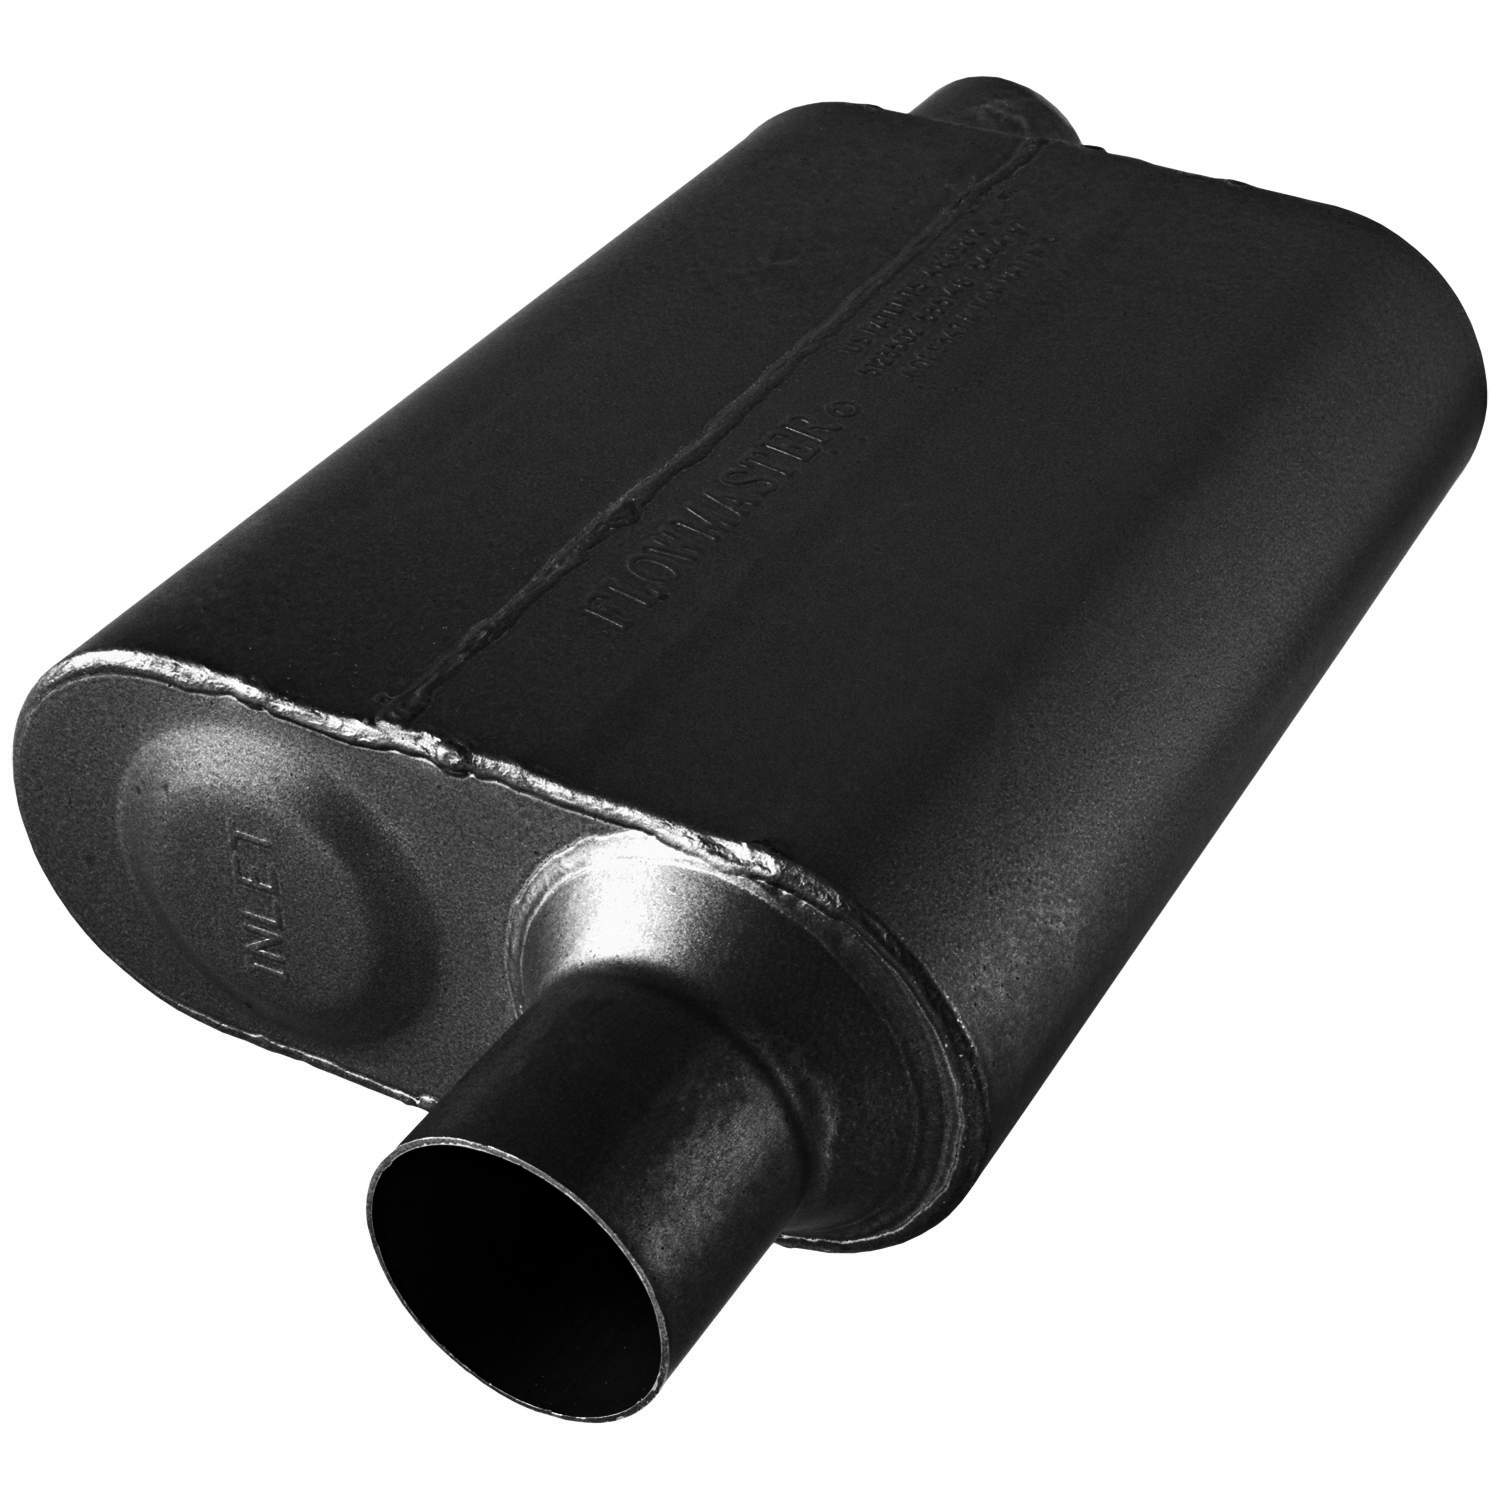 Flowmaster 40 Series Muffler 409s - 2.50 Offset In / 2.50 Offset Out - Aggressive Sound 8042543